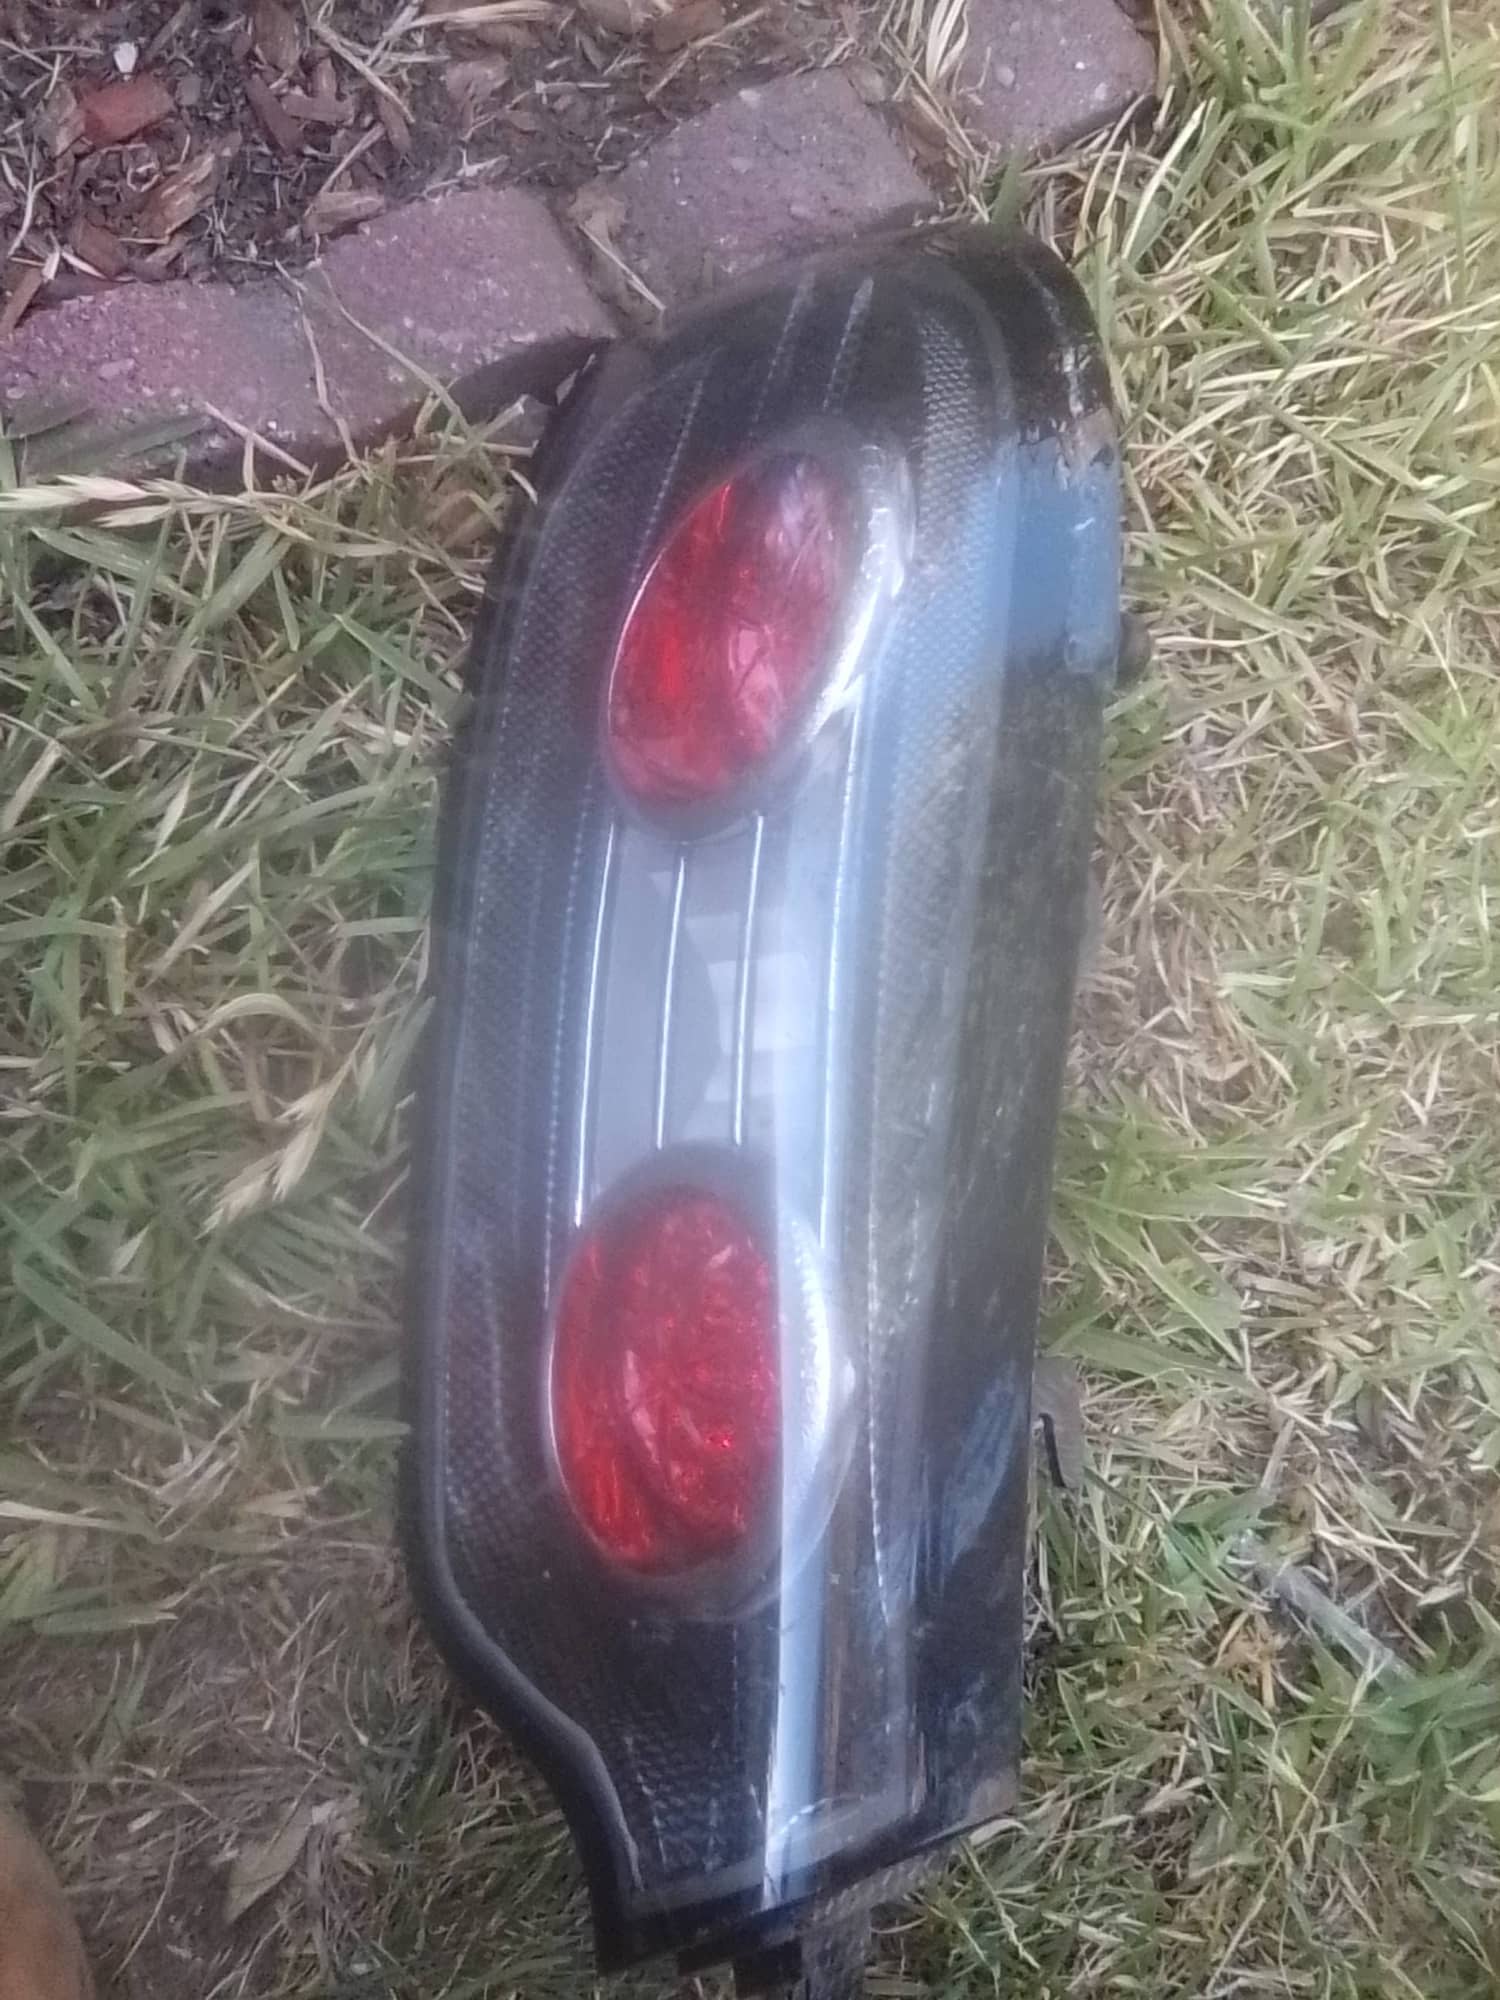 Lights - LED Rear Tail Lights - Used - 1993 to 1995 Mazda RX-7 - San Jose, CA 95121, United States